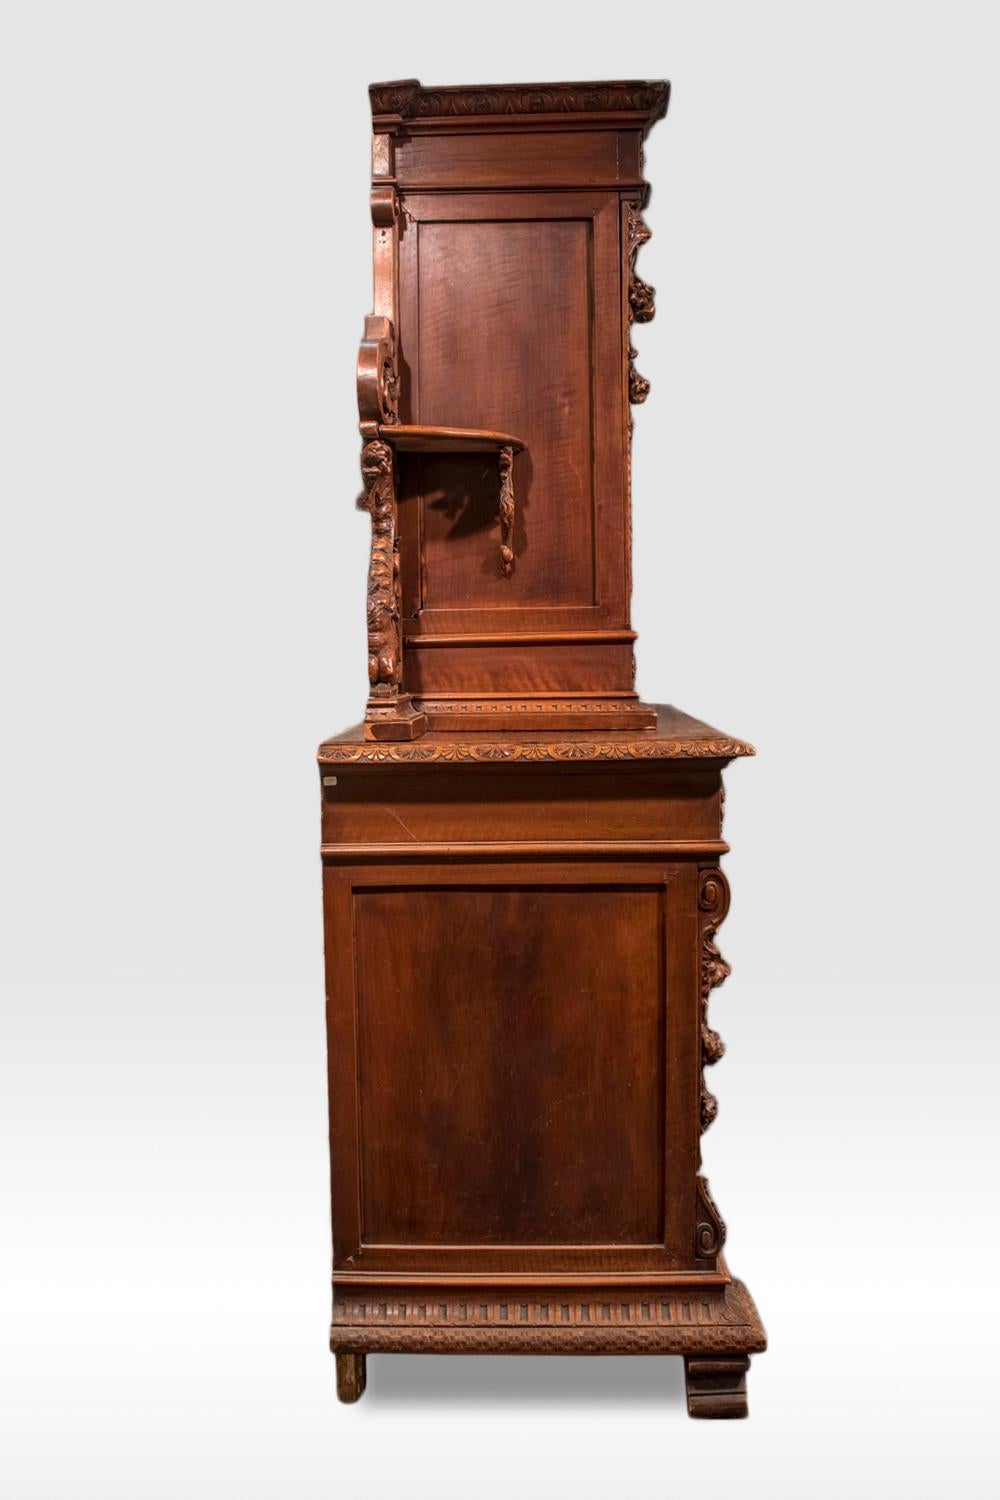 Small walnut Renaissance style two-tiered buffet or sideboard, opening with two door leaves in the lower part and one door leaf in the upper part, two drawers in the middle. The whole ensemble stands on four legs with the front set-off and decorated